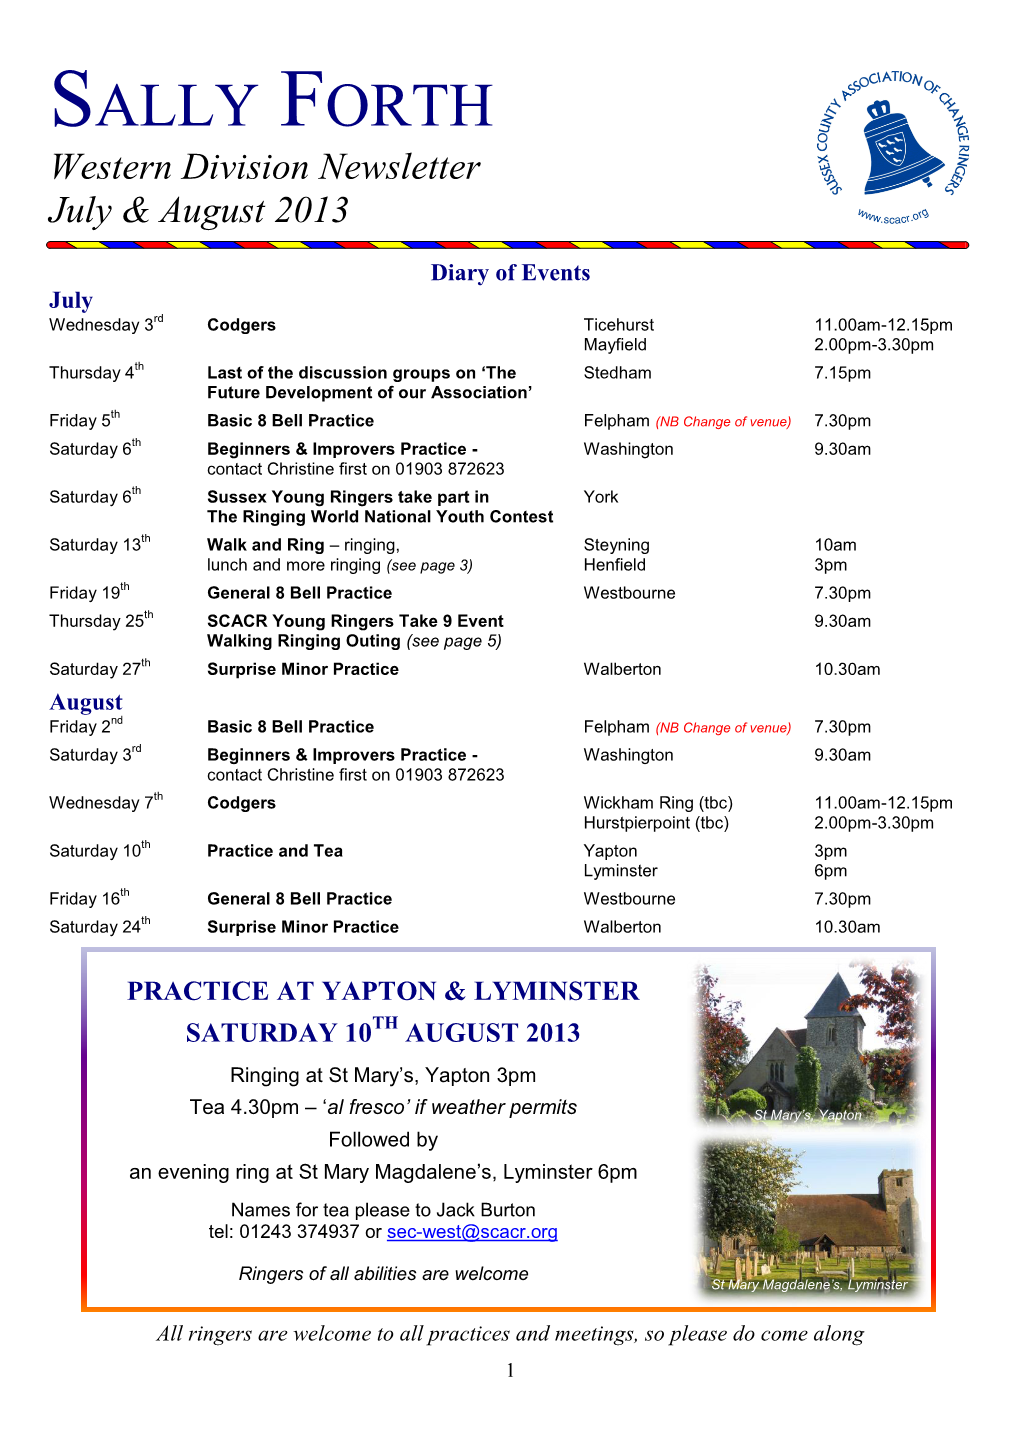 SALLY FORTH Western Division Newsletter July & August 2013